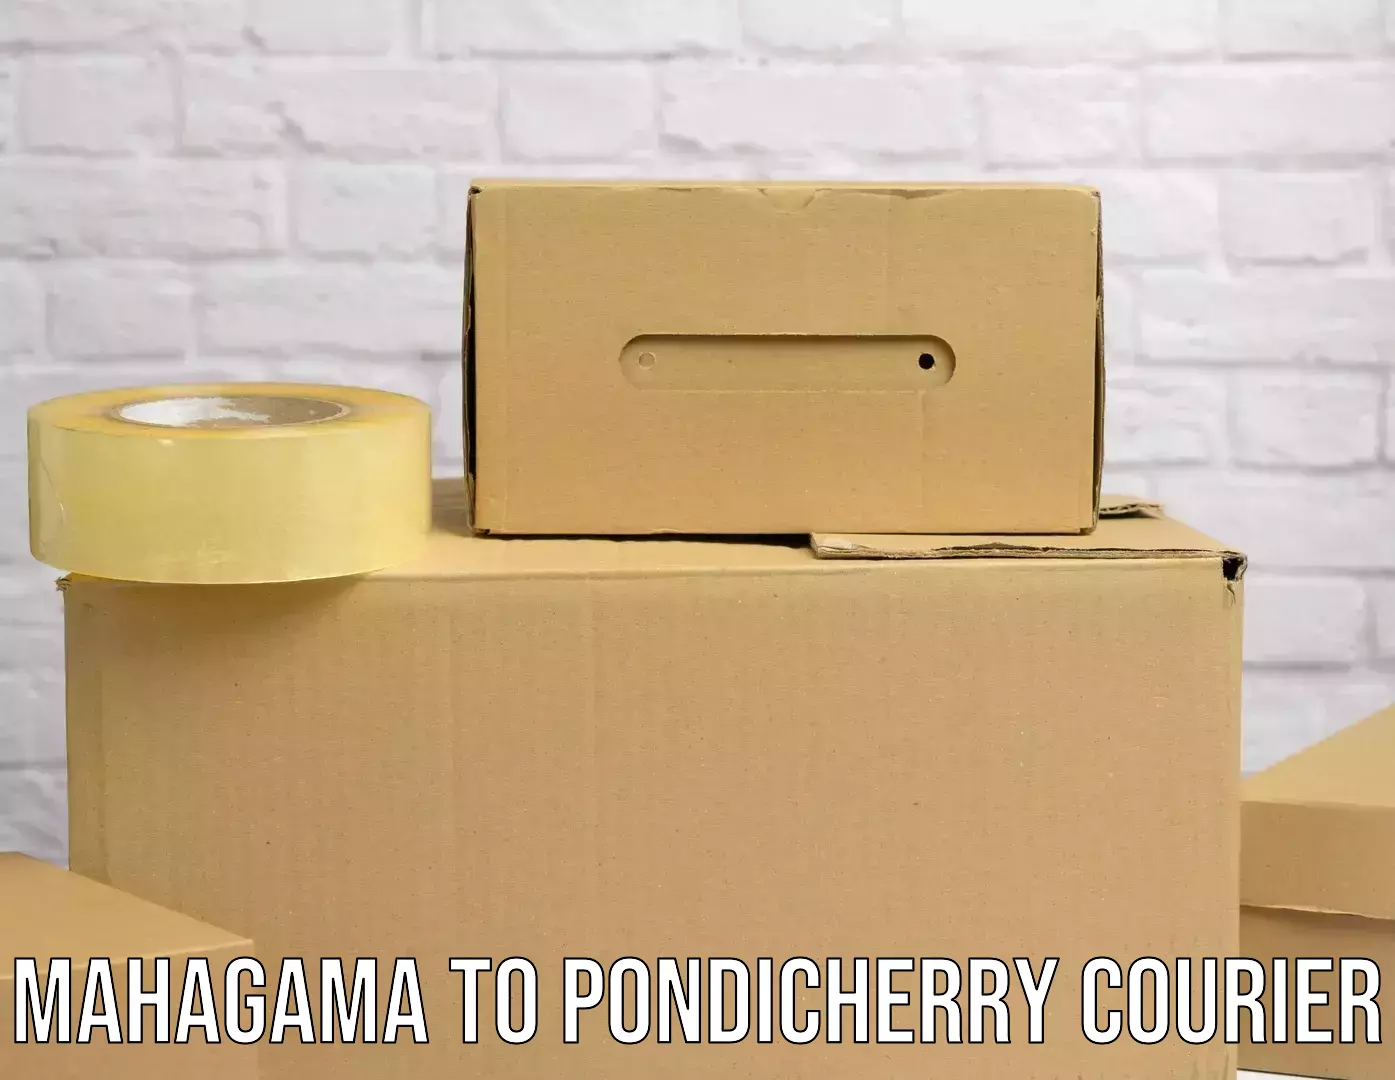 Express delivery capabilities Mahagama to Pondicherry